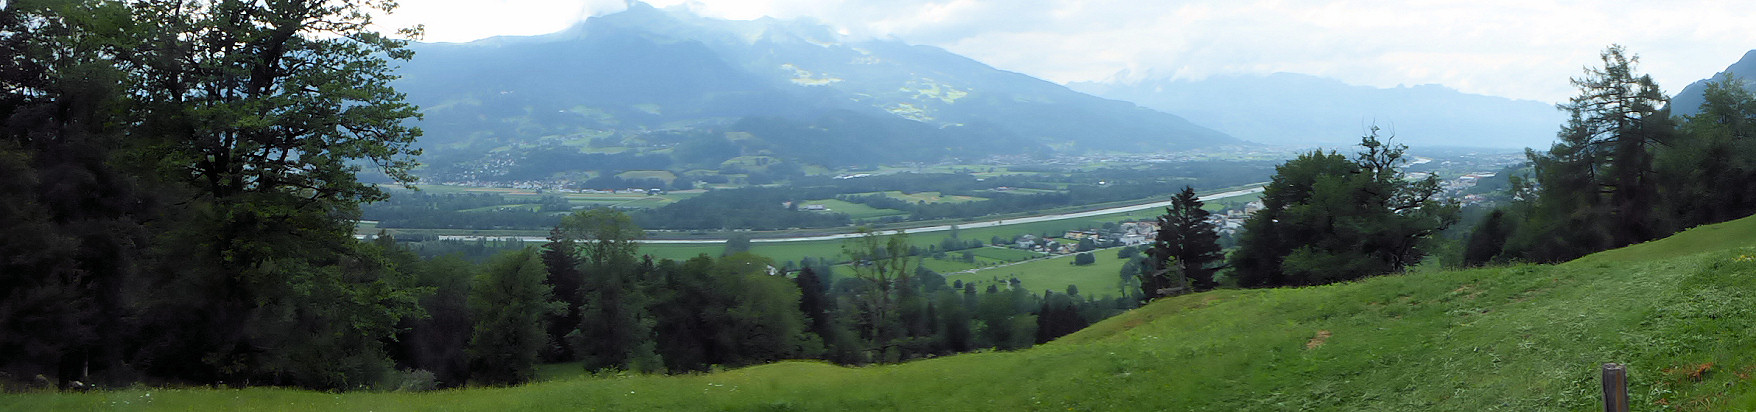 Panorama - View from the meadow at the Matilaberg into the Rhine Valley